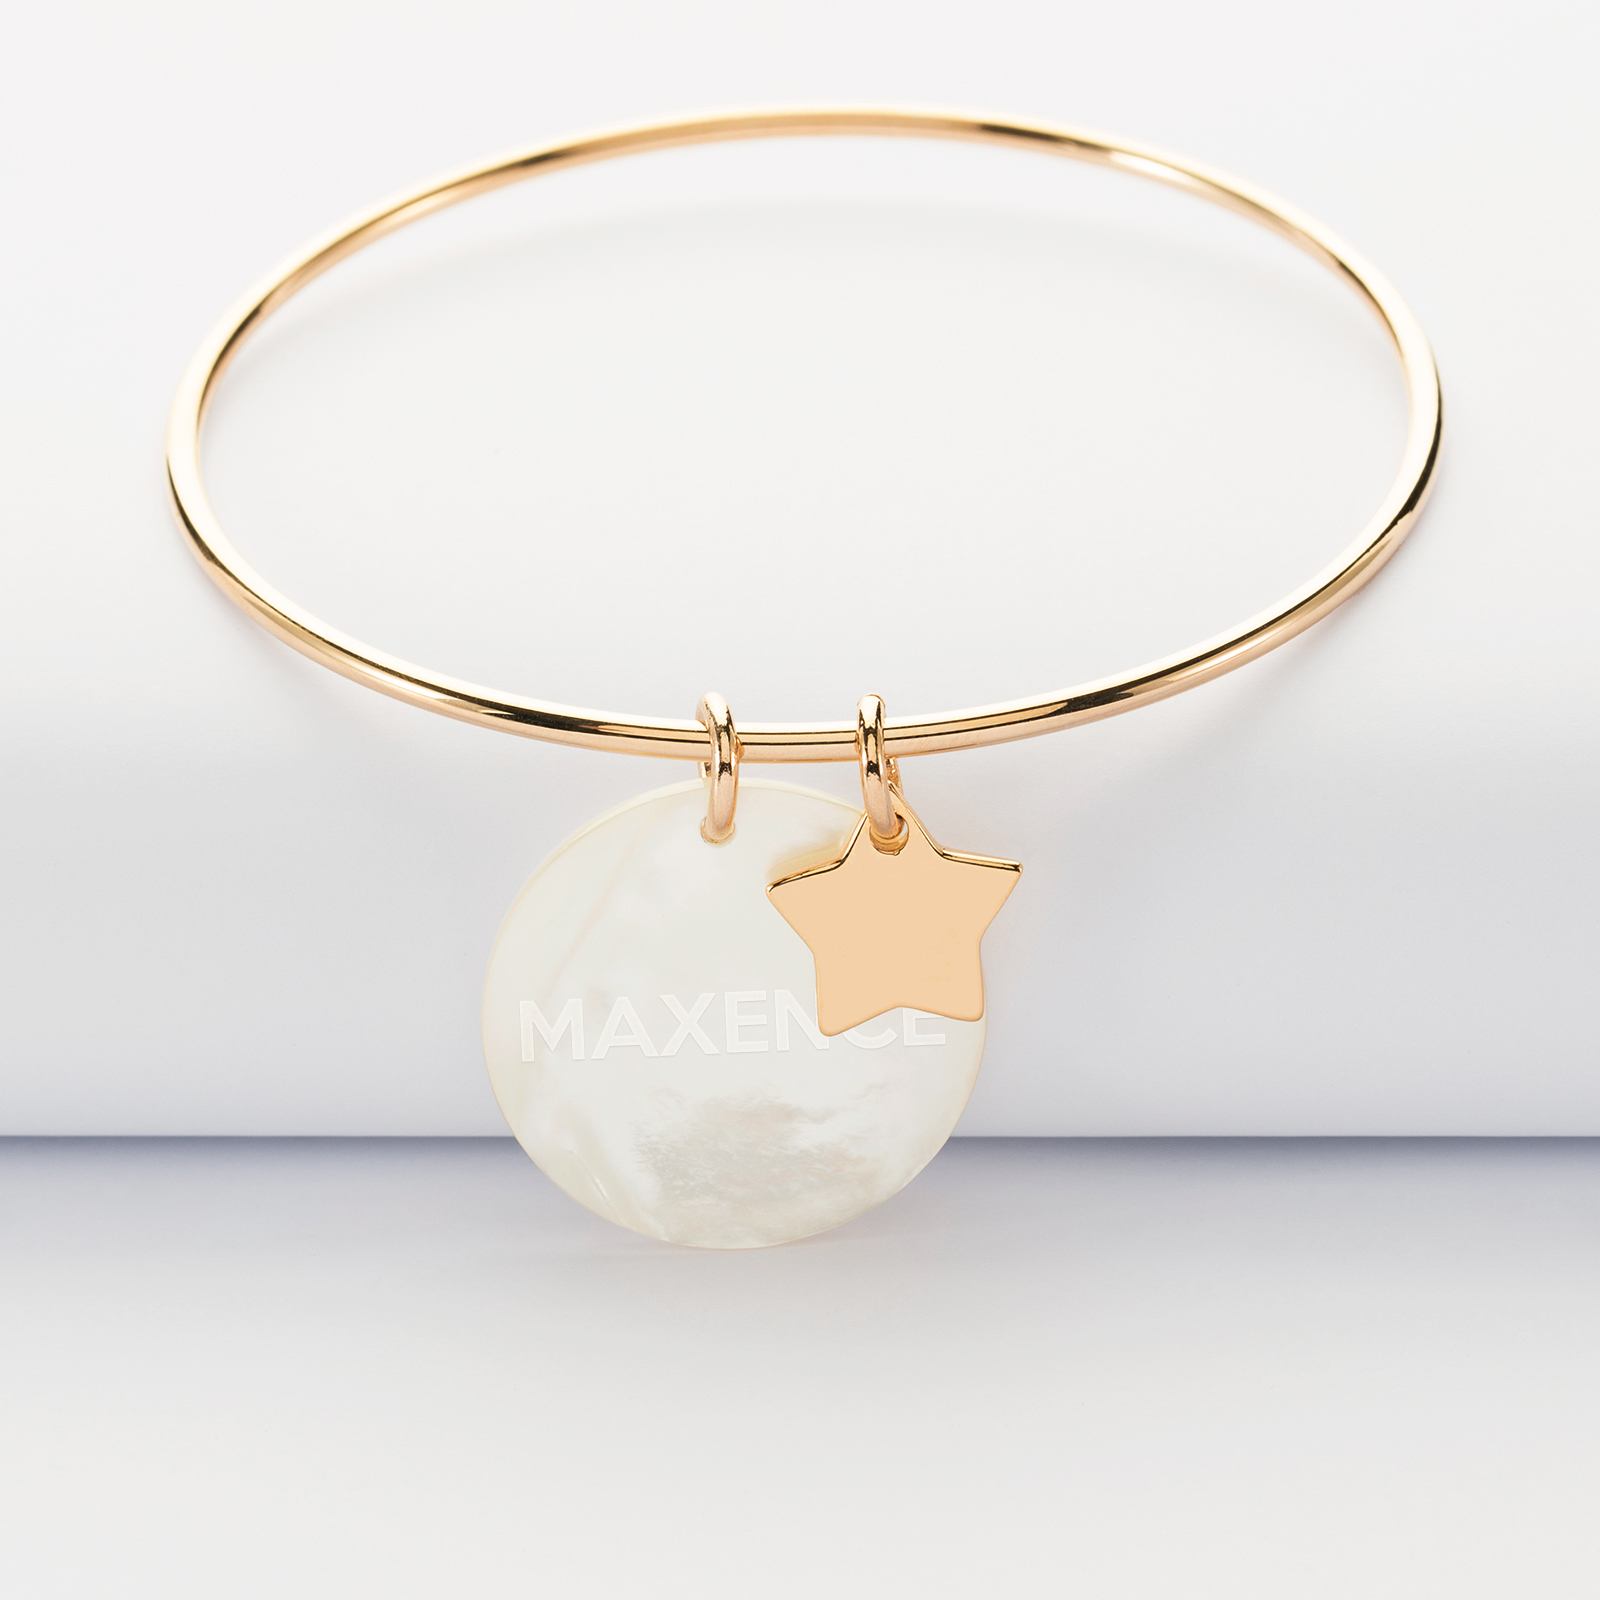 Personalised engraved mother-of-pearl medallion cord bracelet 25 mm and gold-plated star charm 12 mm - 1